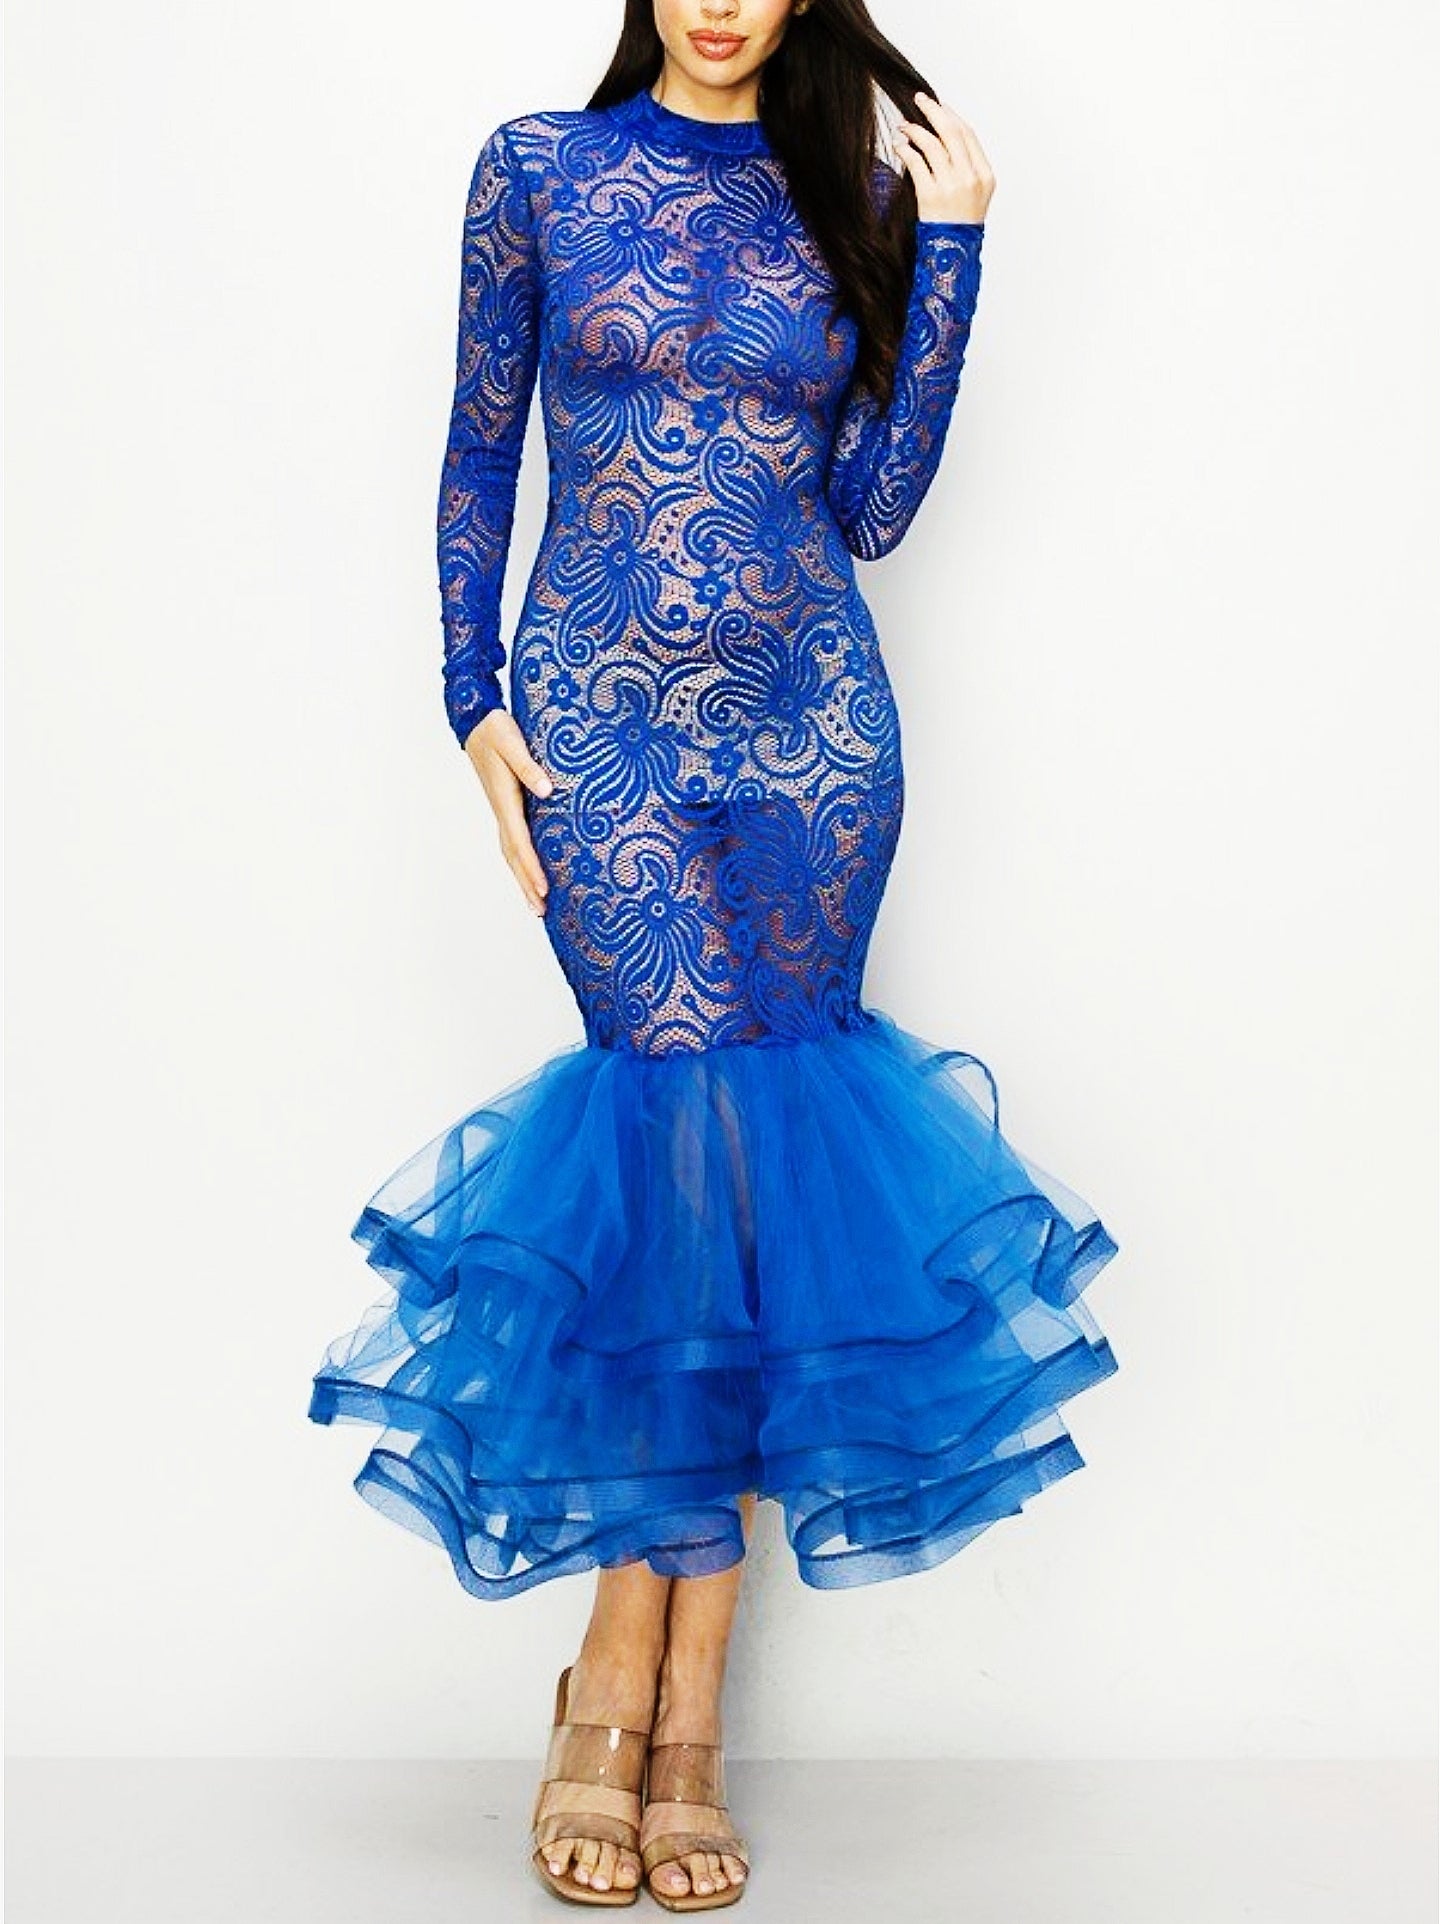 Fabby Glamtique Dress Lace Bodycon Evening Gown